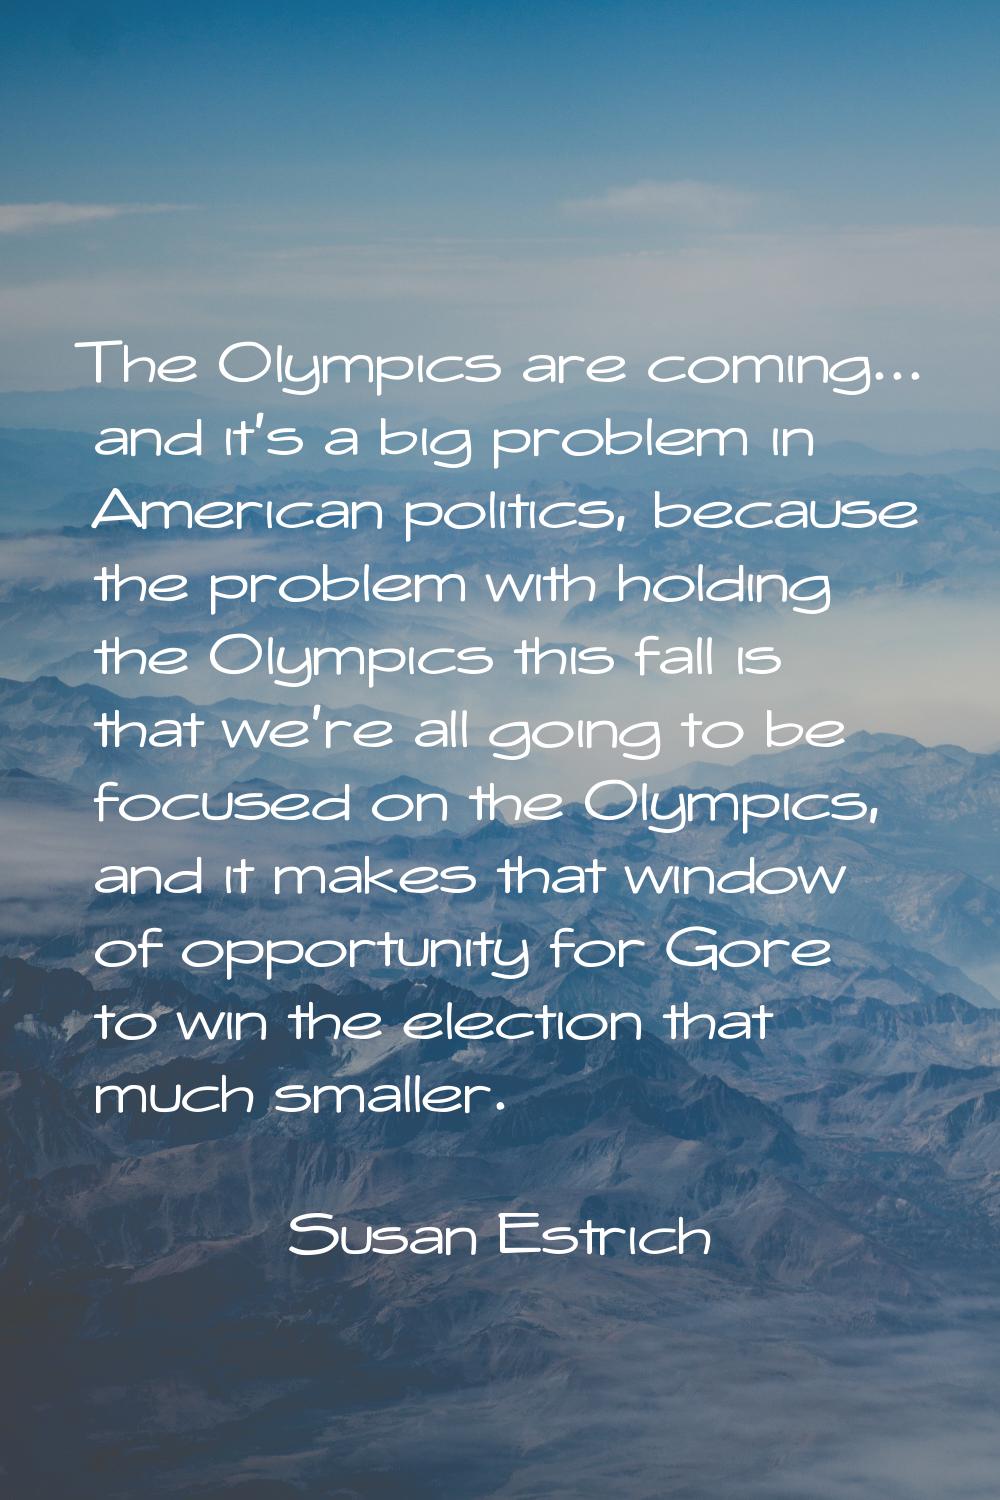 The Olympics are coming... and it's a big problem in American politics, because the problem with ho